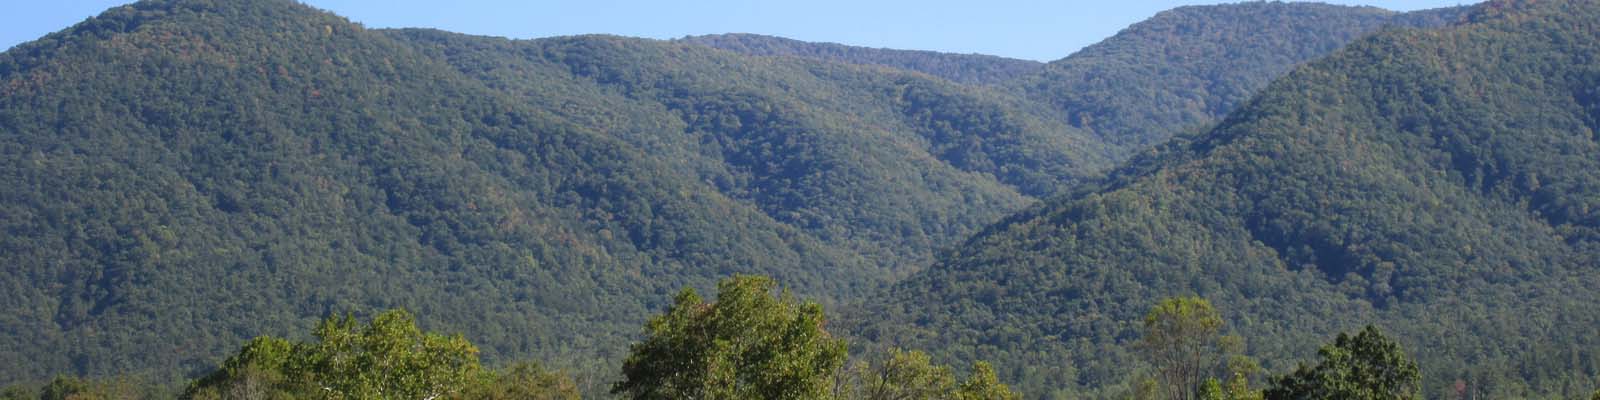 Pictured: Mountains in Tennessee.